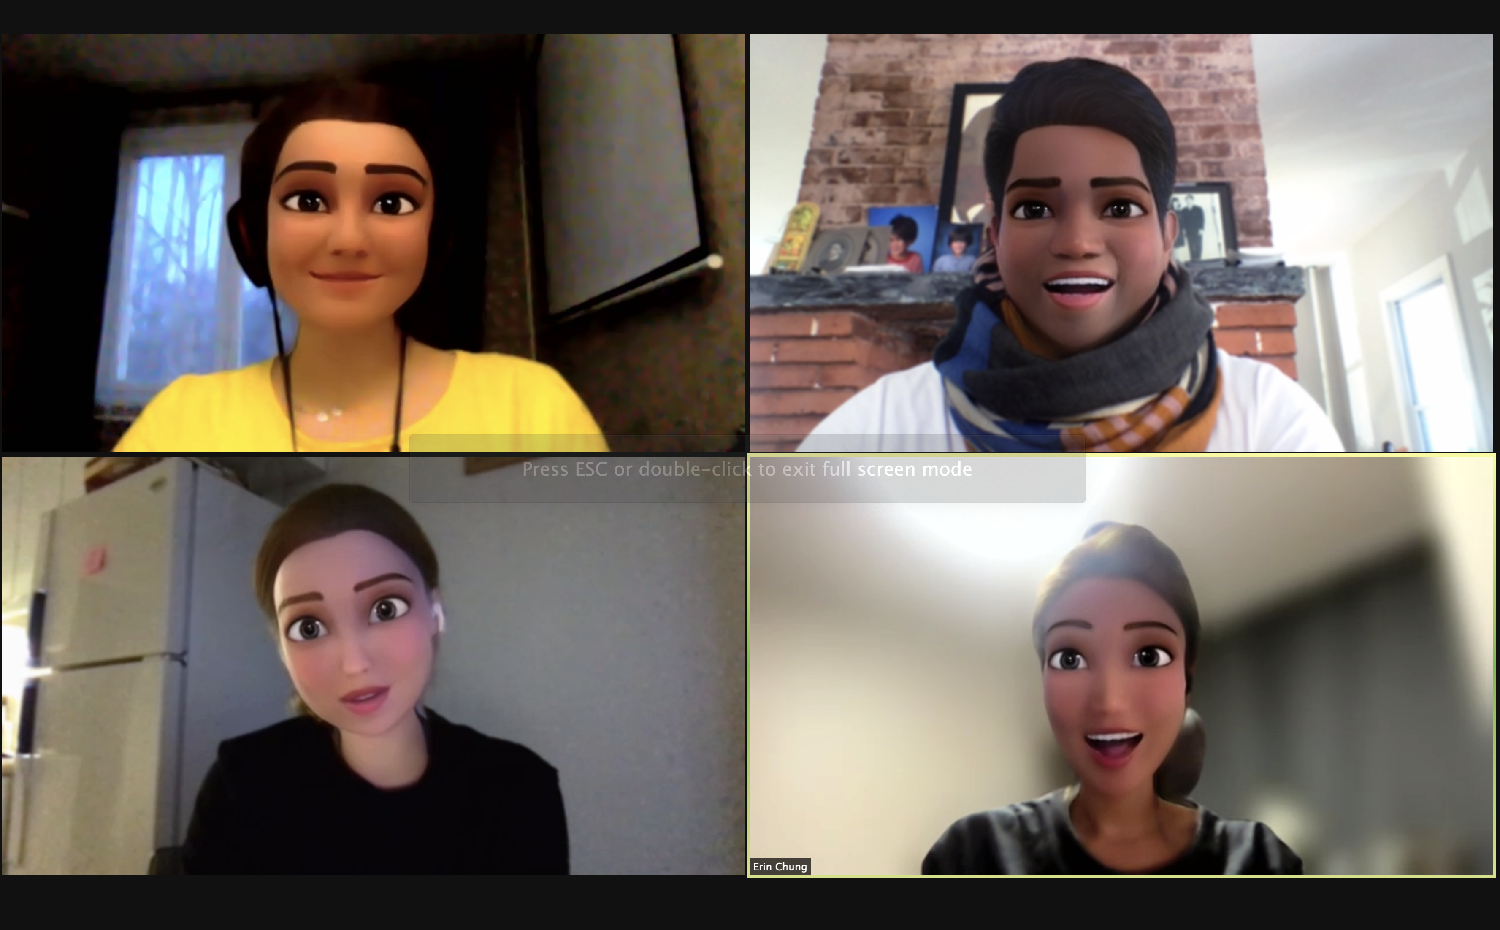 Our Digital Design team having a little extra fun on their daily meeting. 